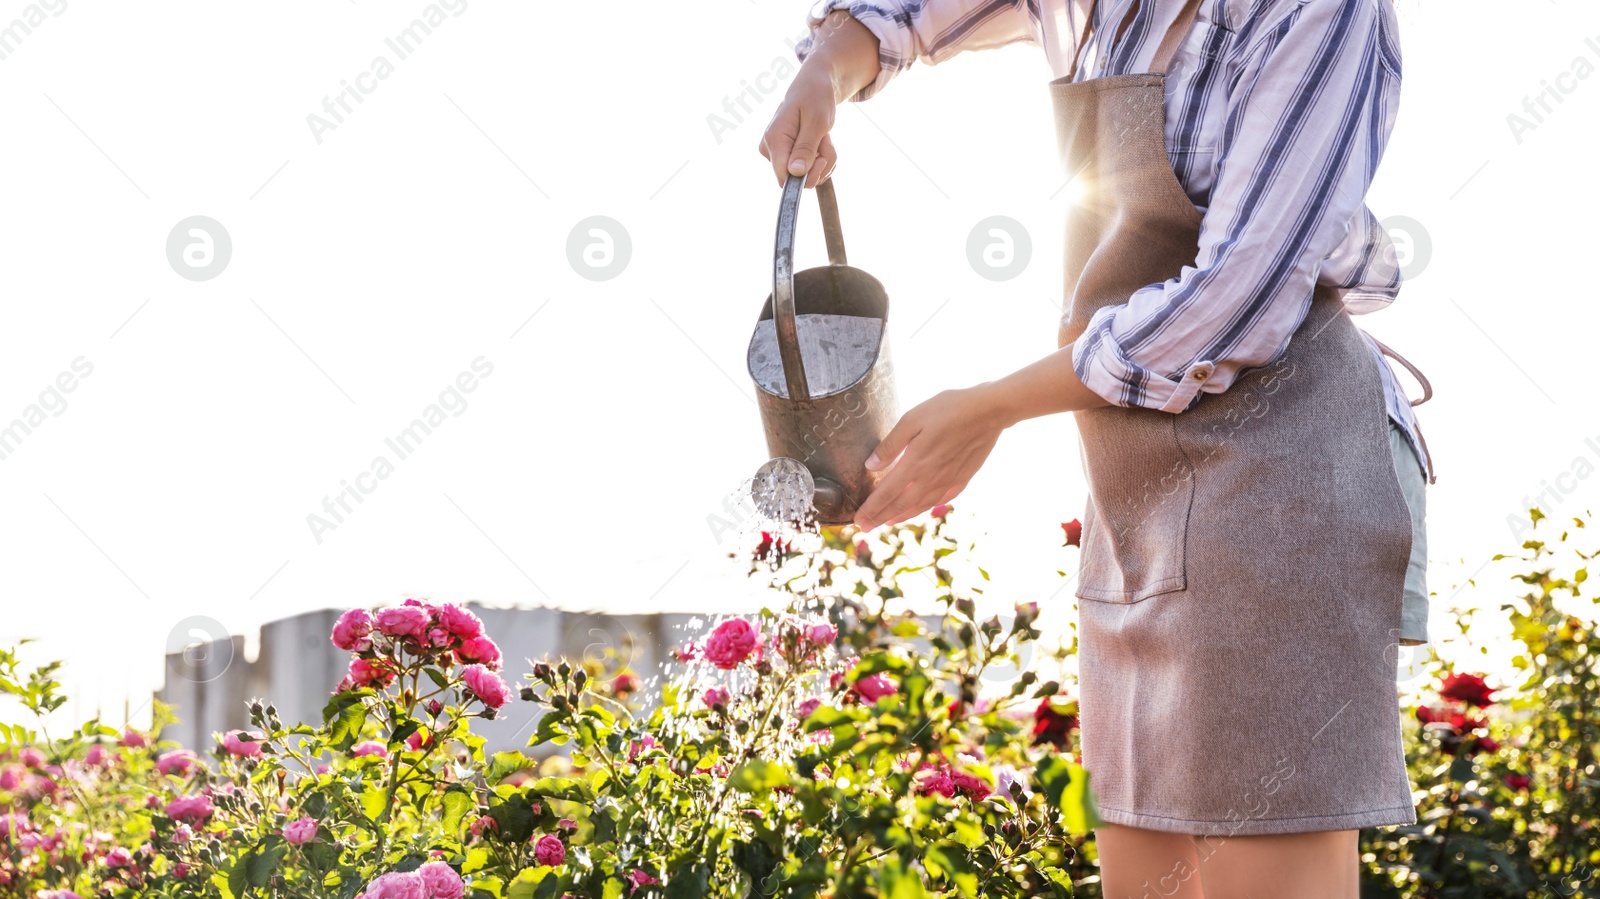 Photo of Closeup view of woman watering rose bushes outdoors. Gardening tool